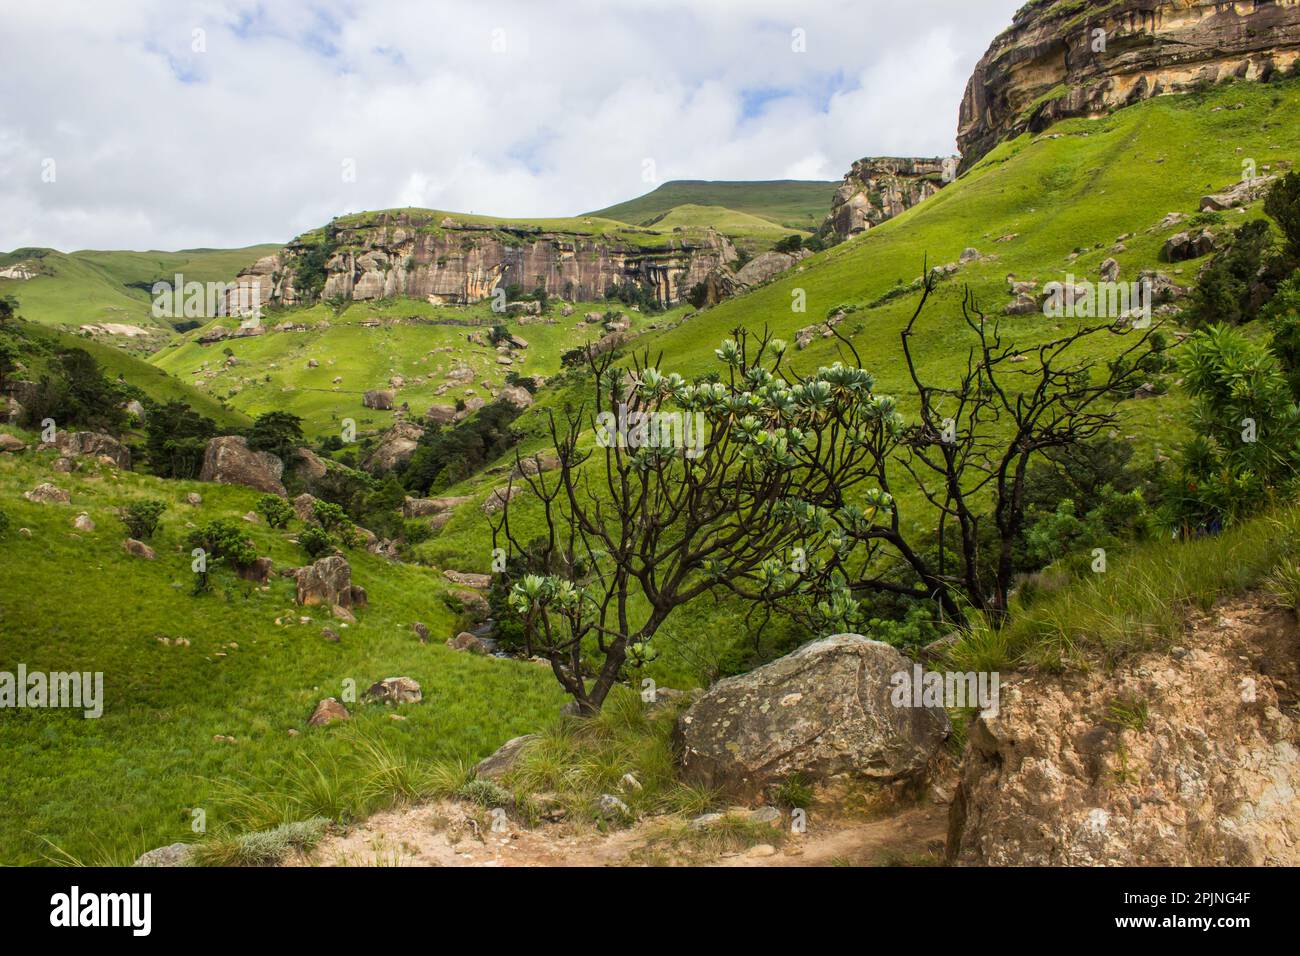 The Afromontane grasslands of the Drakensberg mountains with a common sugarbush in the foreground Stock Photo